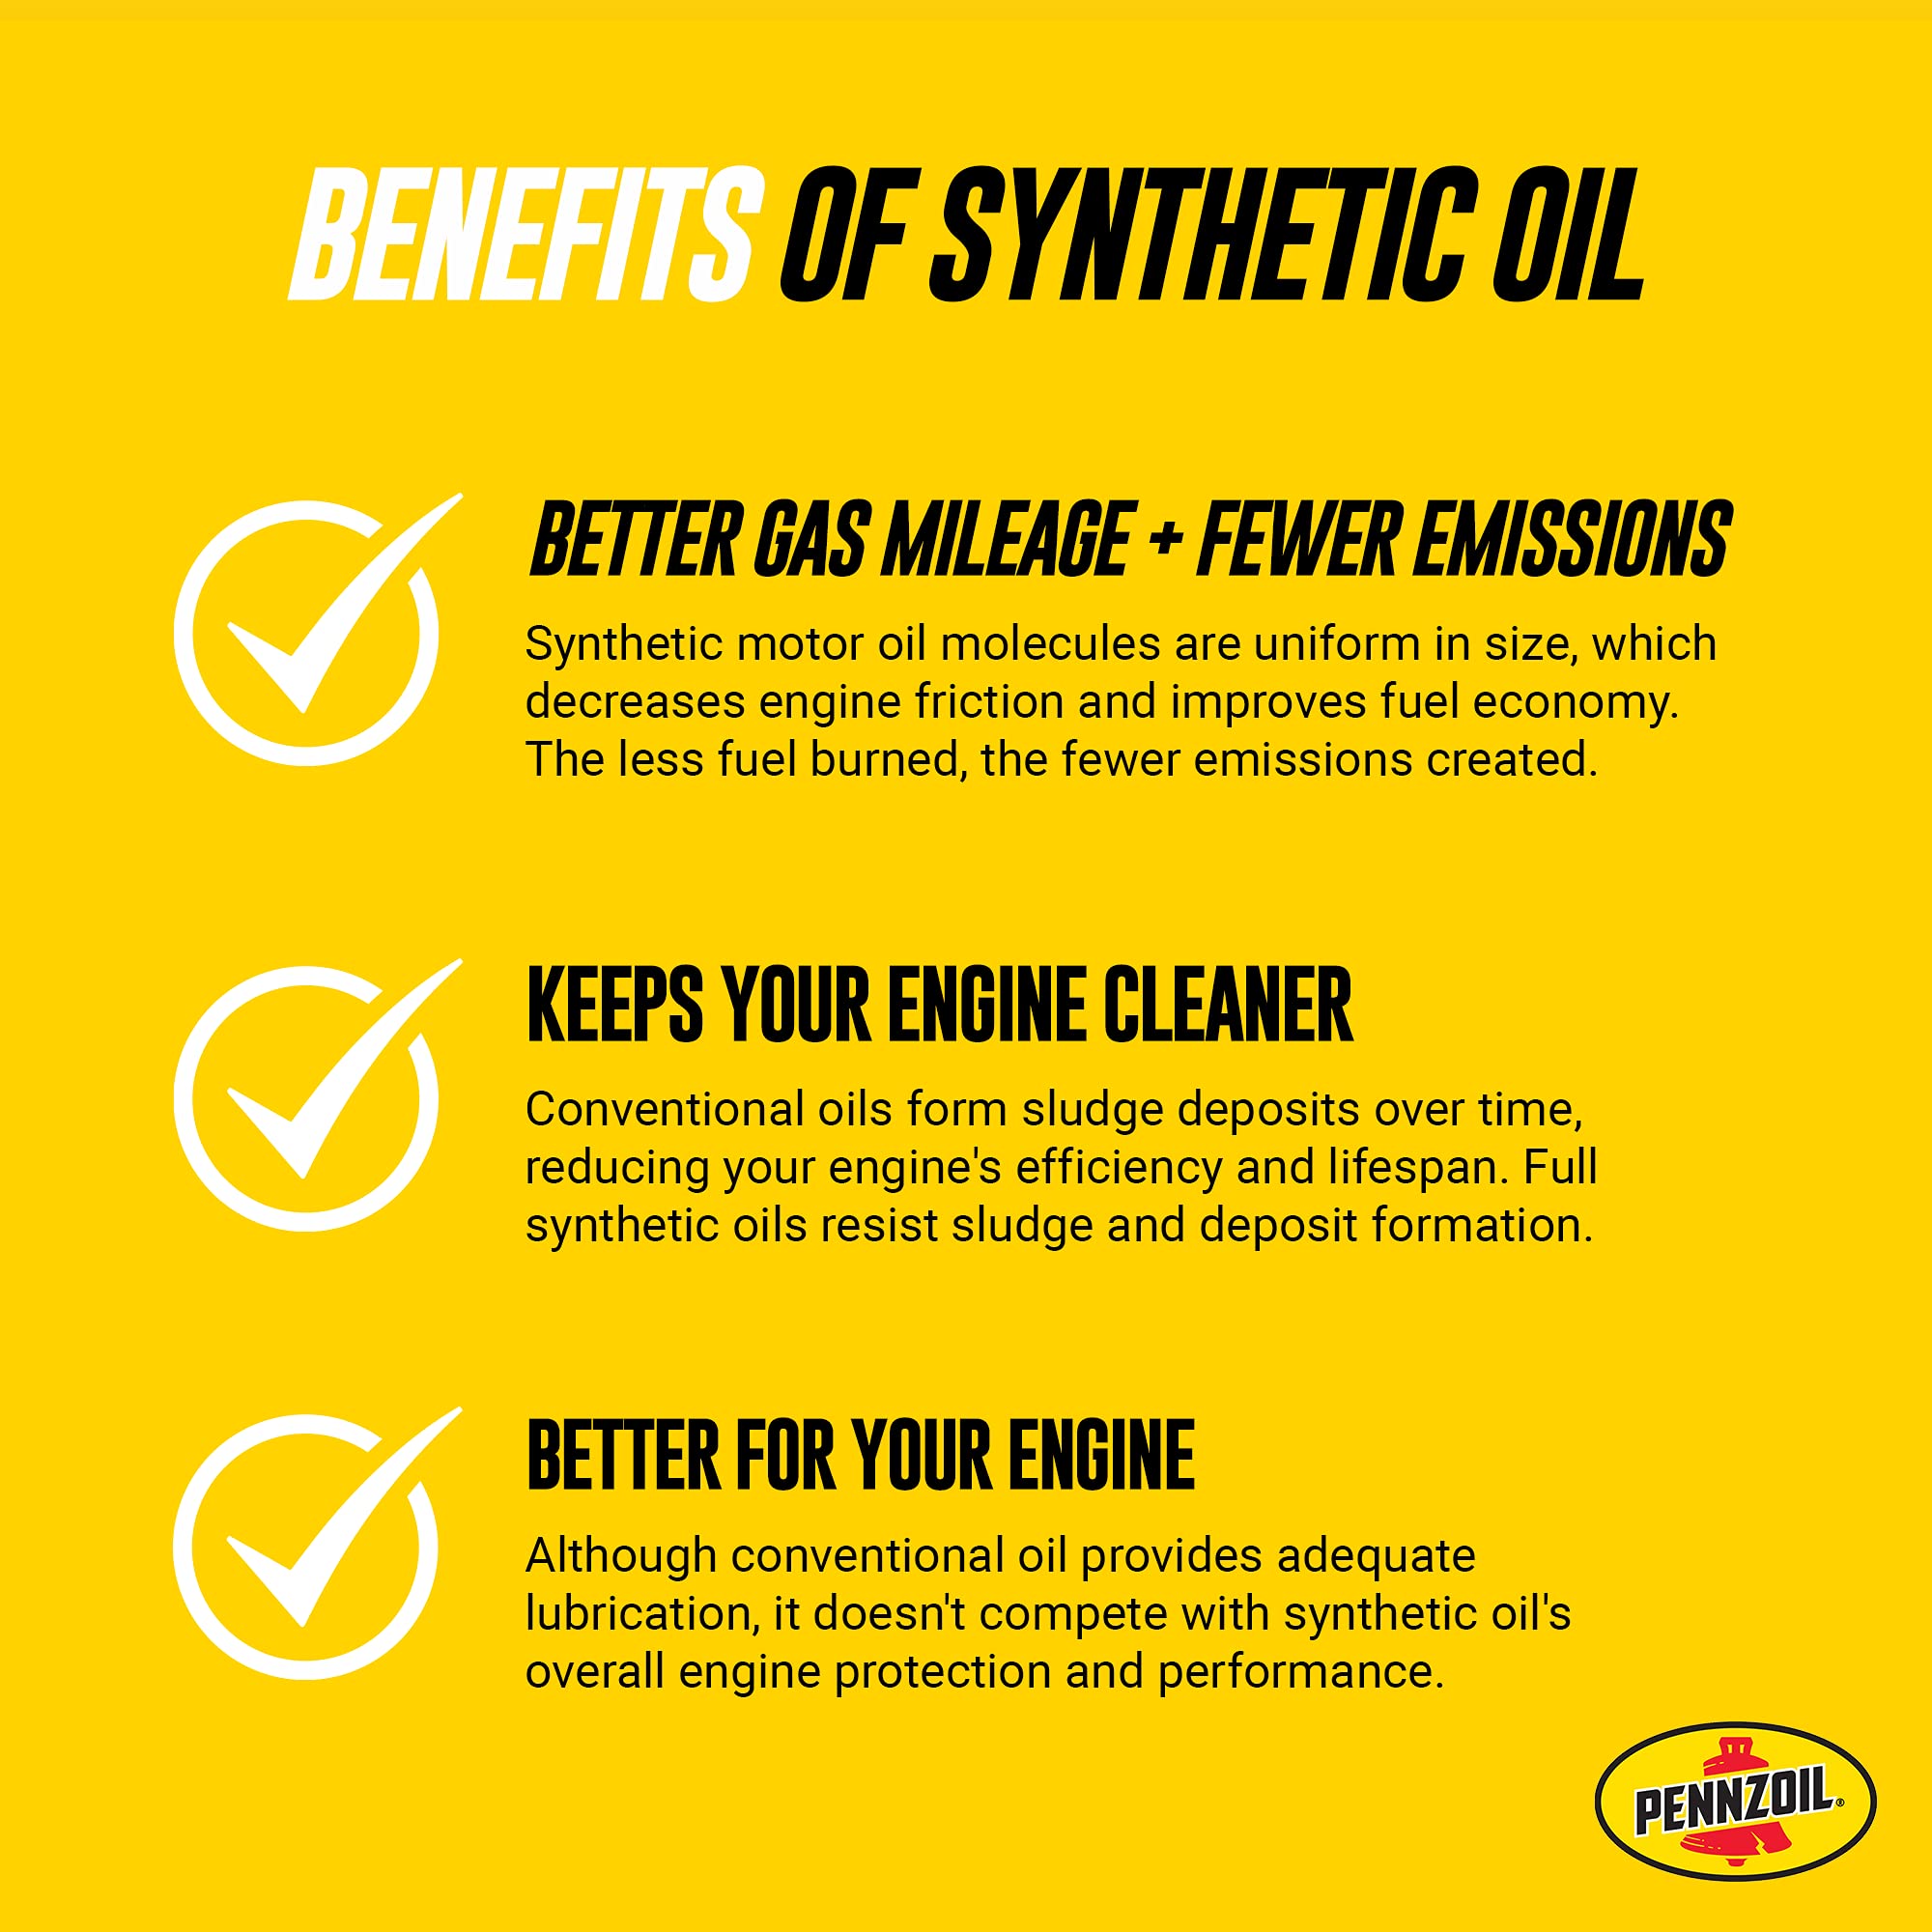 Best Pennzoil Synthetic Oil for Your Car: This Expert Review Tells You What You Need to Know